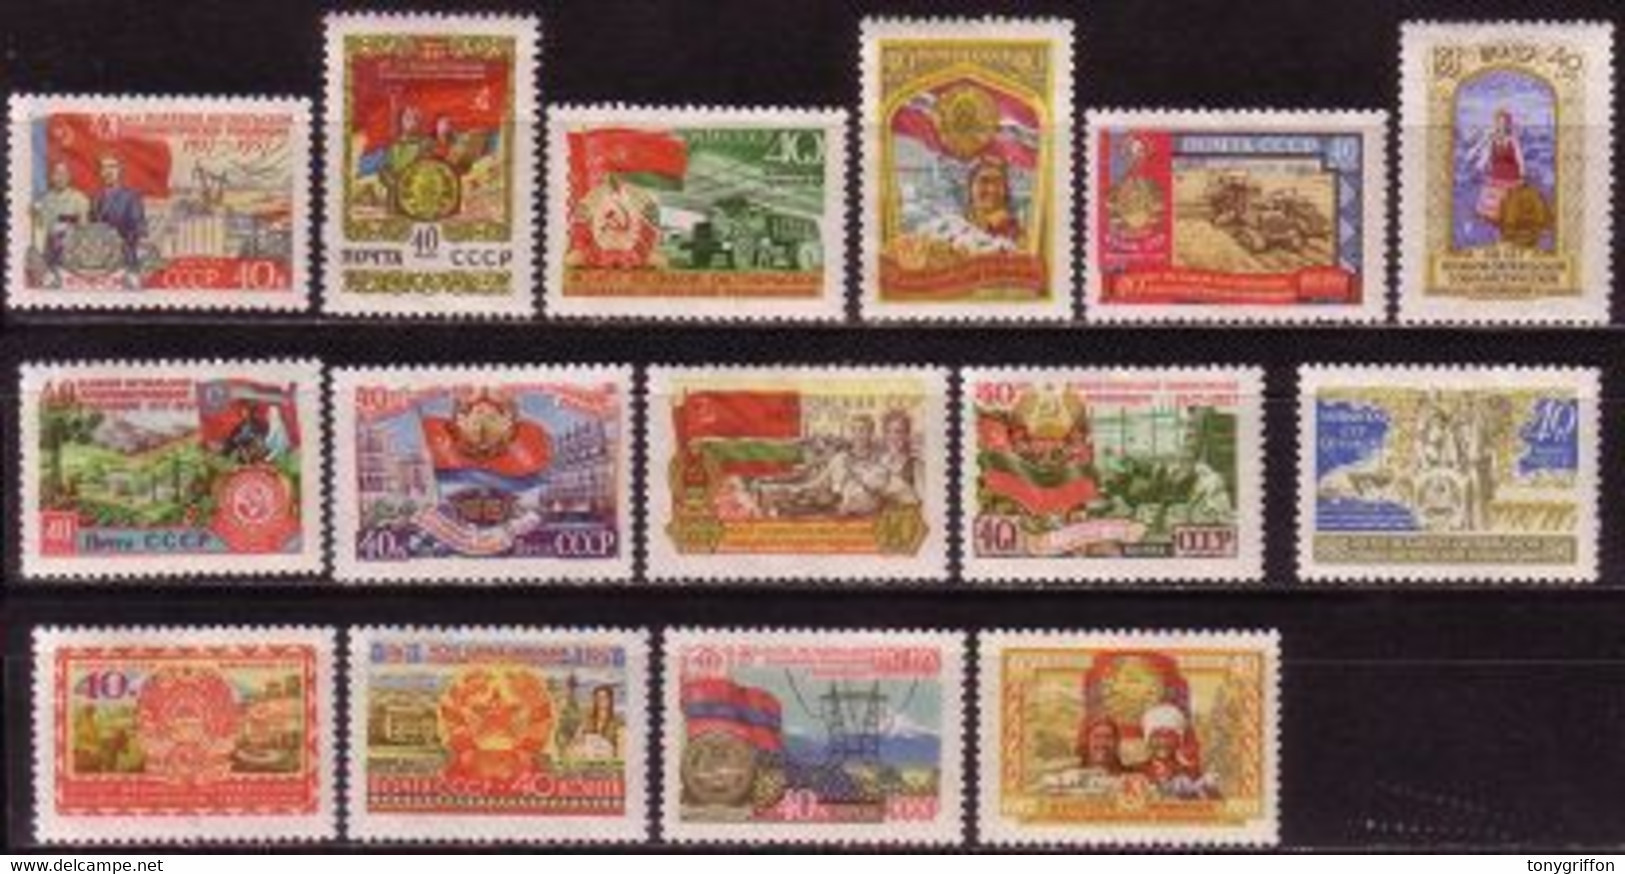 CCCP/URSS/RUSSIE/RUSSIA/ZSRR 1957**  MI.2000-2001+2003-14**,ZAG.2077-88+90-91,YVERT...WITHOUT NR MI.2002/ZAG 2089 - Unused Stamps